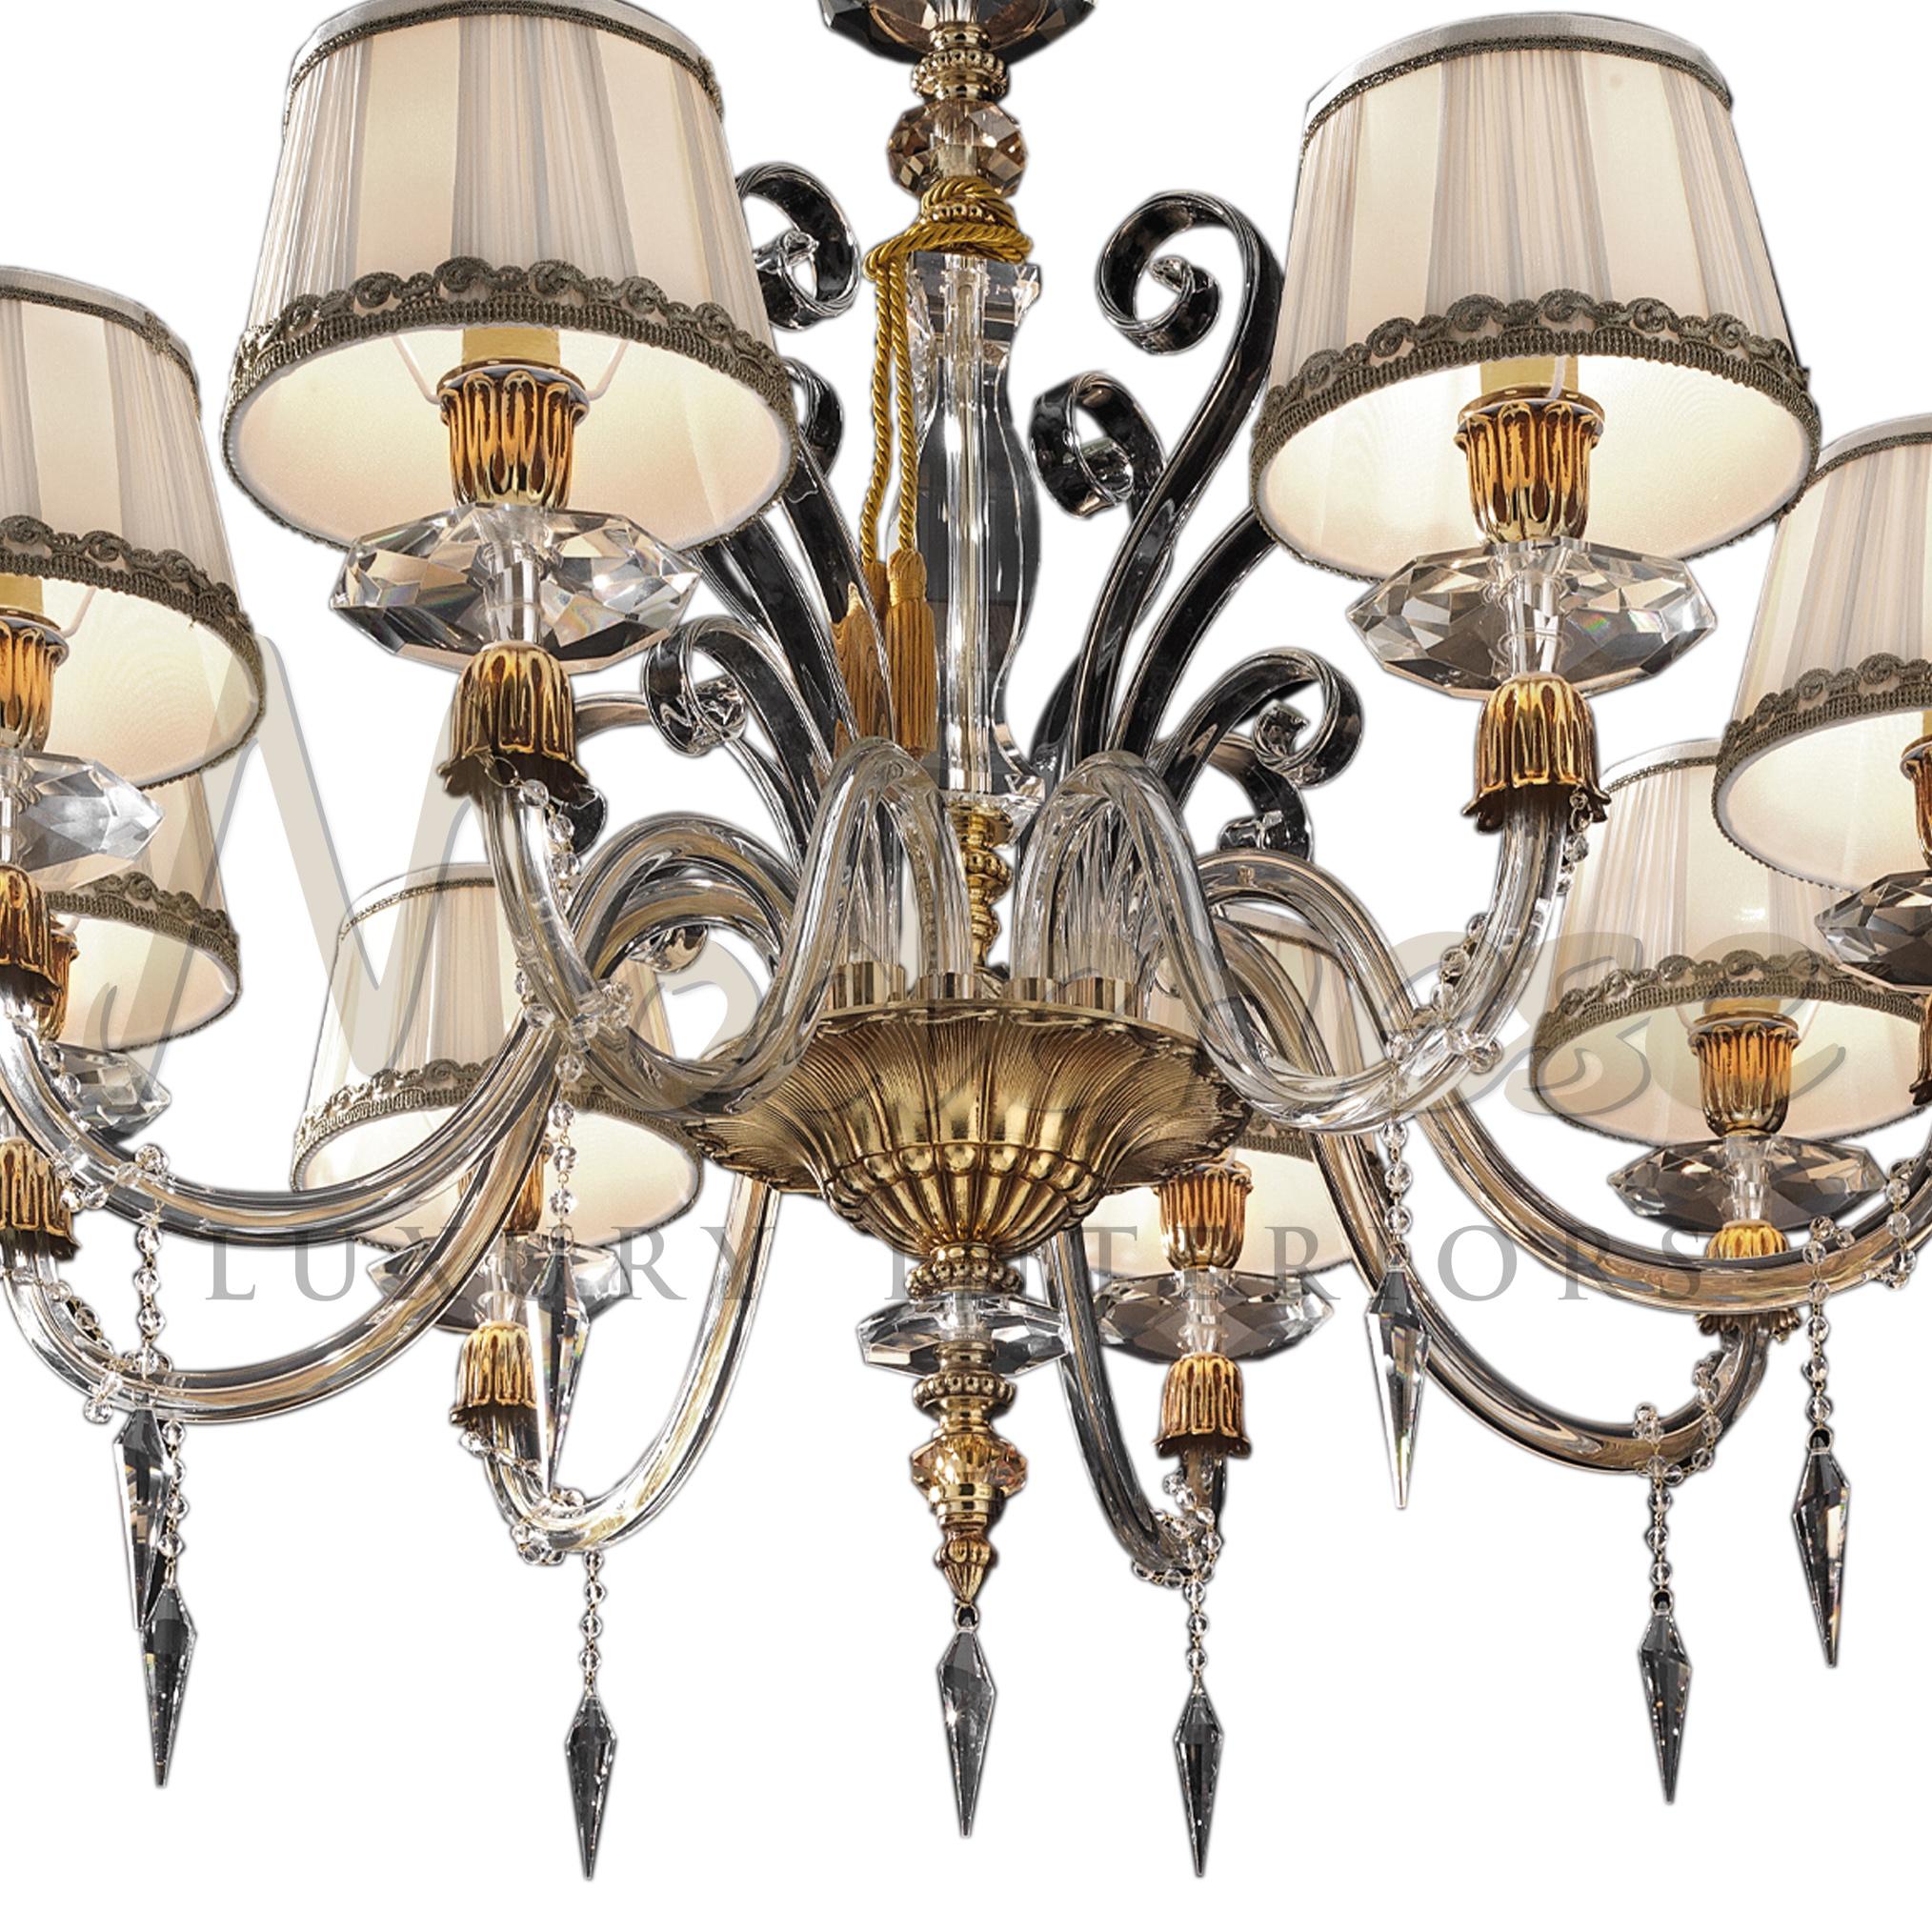 Let yourself be seduced by this transparent crystal chandelier with amber details and french gold metal finish that will transform any room and create a feeling of eternal celebration, brilliance and luxury. This model requires 8 single E14 screw